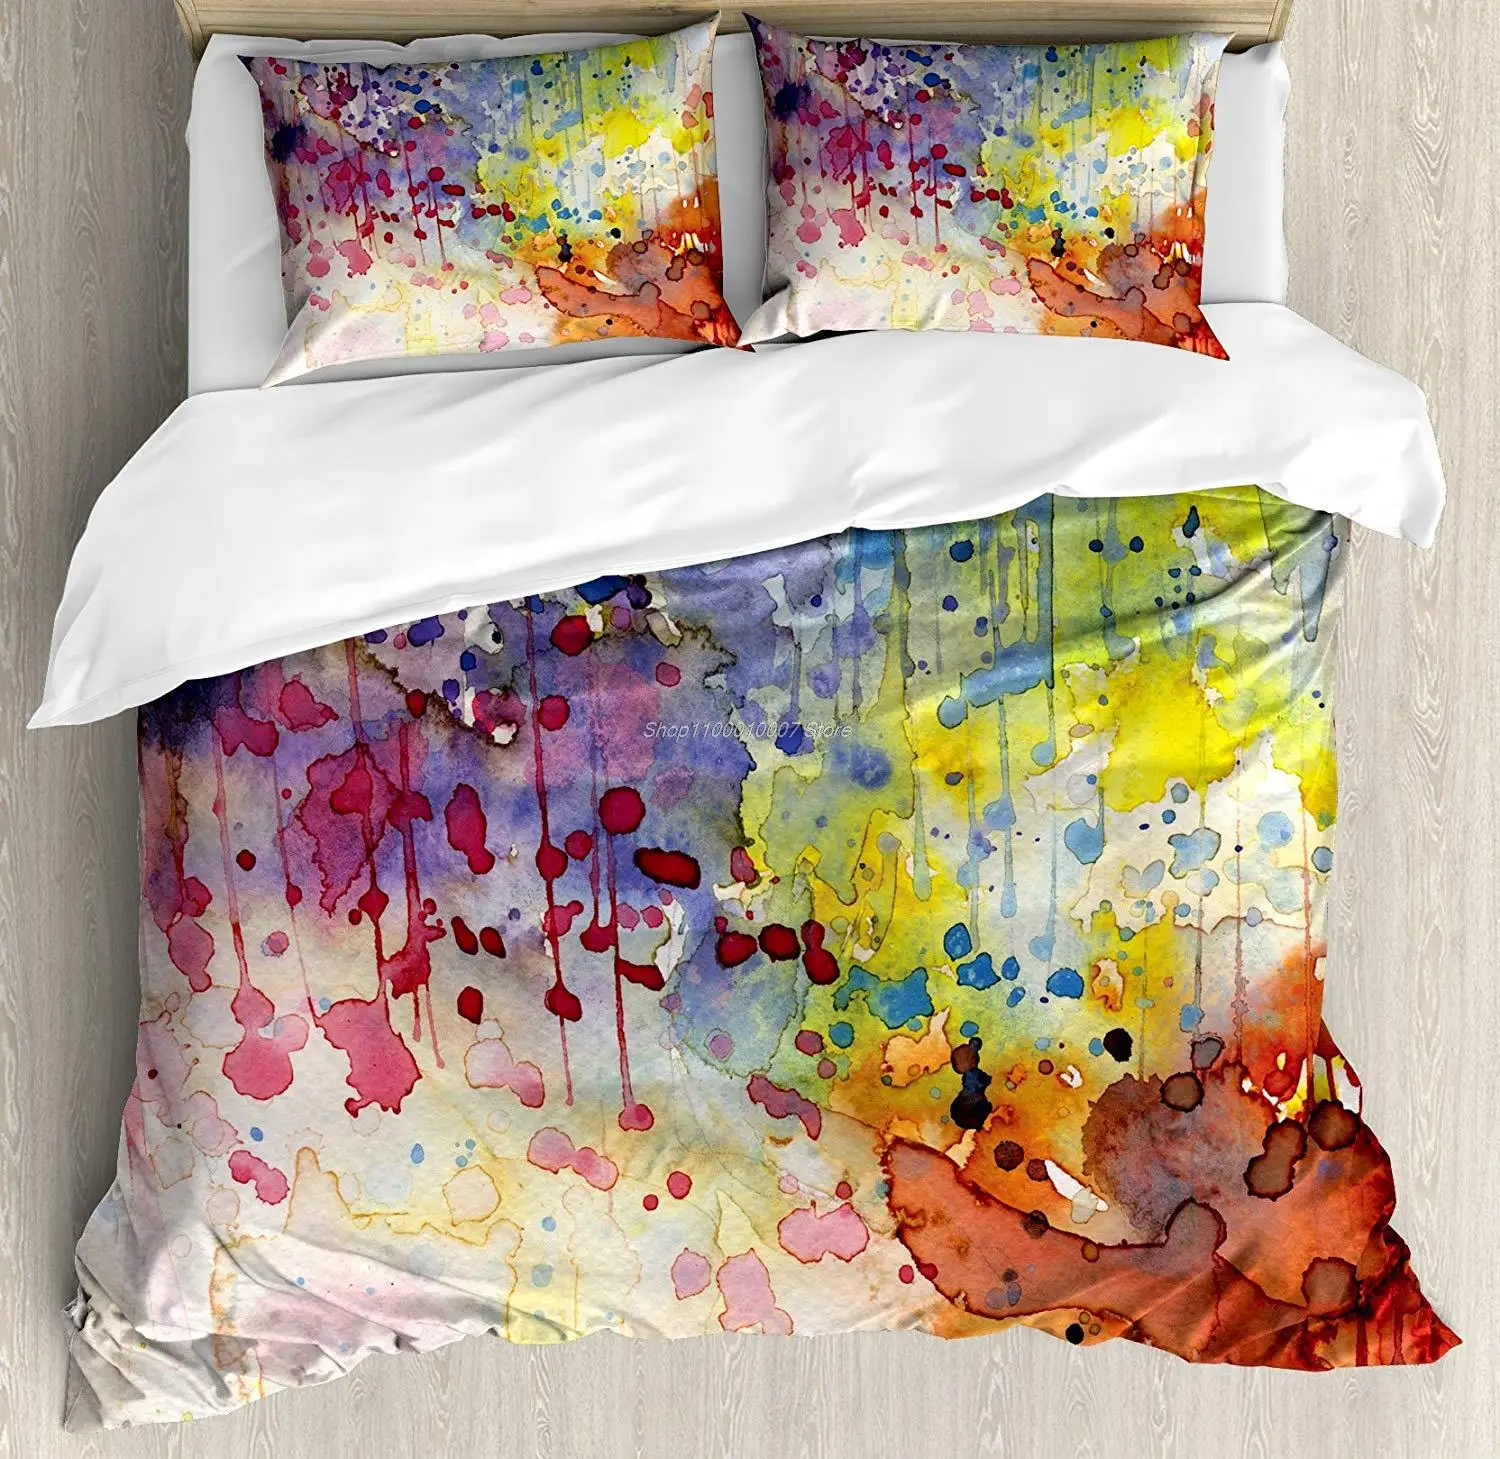 

Abstract Duvet Cover Set Queen Size Grunge Style Dirty Look with Colorful Watercolor Spots Liquid Splashes Artistic Decorative